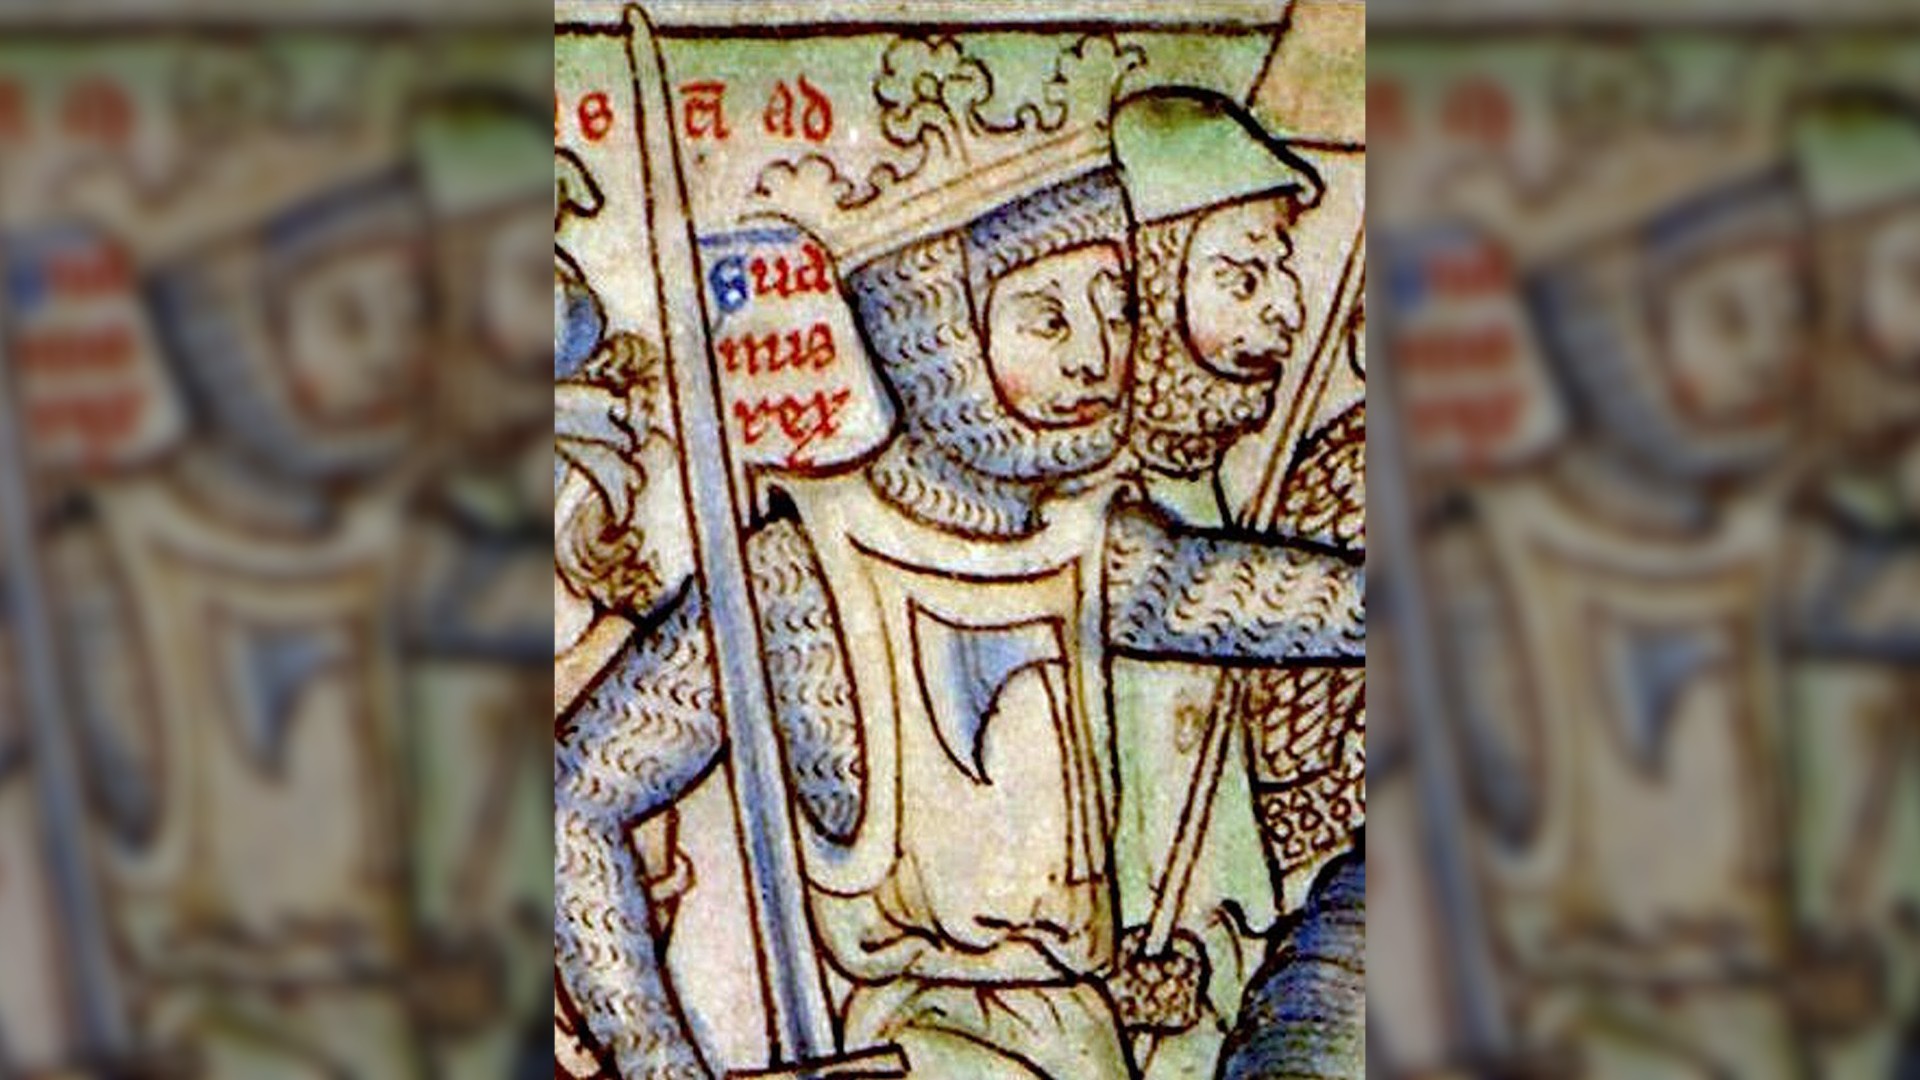 Portrayal of Sweyn Forkbeard.  He is wearing chain mail, a crown, a white tabard and an axe.